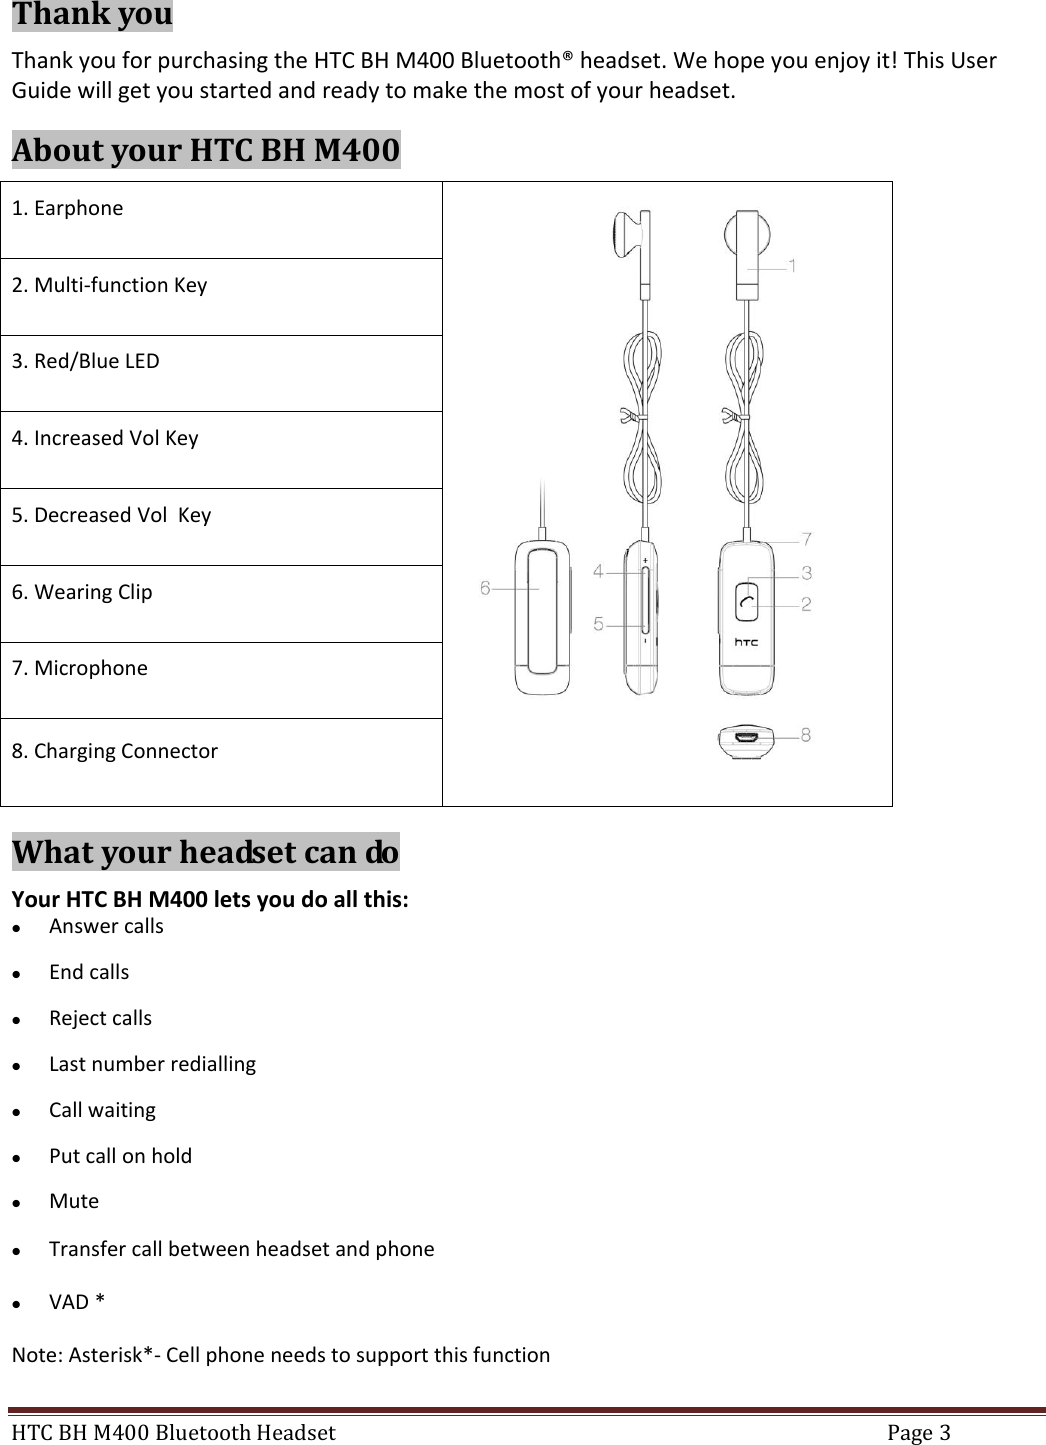 HTC BH M400 Bluetooth Headset  Page 3  Thank you Thank you for purchasing the HTC BH M400 Bluetooth® headset. We hope you enjoy it! This User Guide will get you started and ready to make the most of your headset. About your HTC BH M400 1. Earphone  2. Multi-function Key 3. Red/Blue LED 4. Increased Vol Key 5. Decreased Vol  Key 6. Wearing Clip 7. Microphone 8. Charging Connector What your headset can do Your HTC BH M400 lets you do all this:  Answer calls  End calls  Reject calls  Last number redialling  Call waiting  Put call on hold  Mute  Transfer call between headset and phone  VAD * Note: Asterisk*- Cell phone needs to support this function 